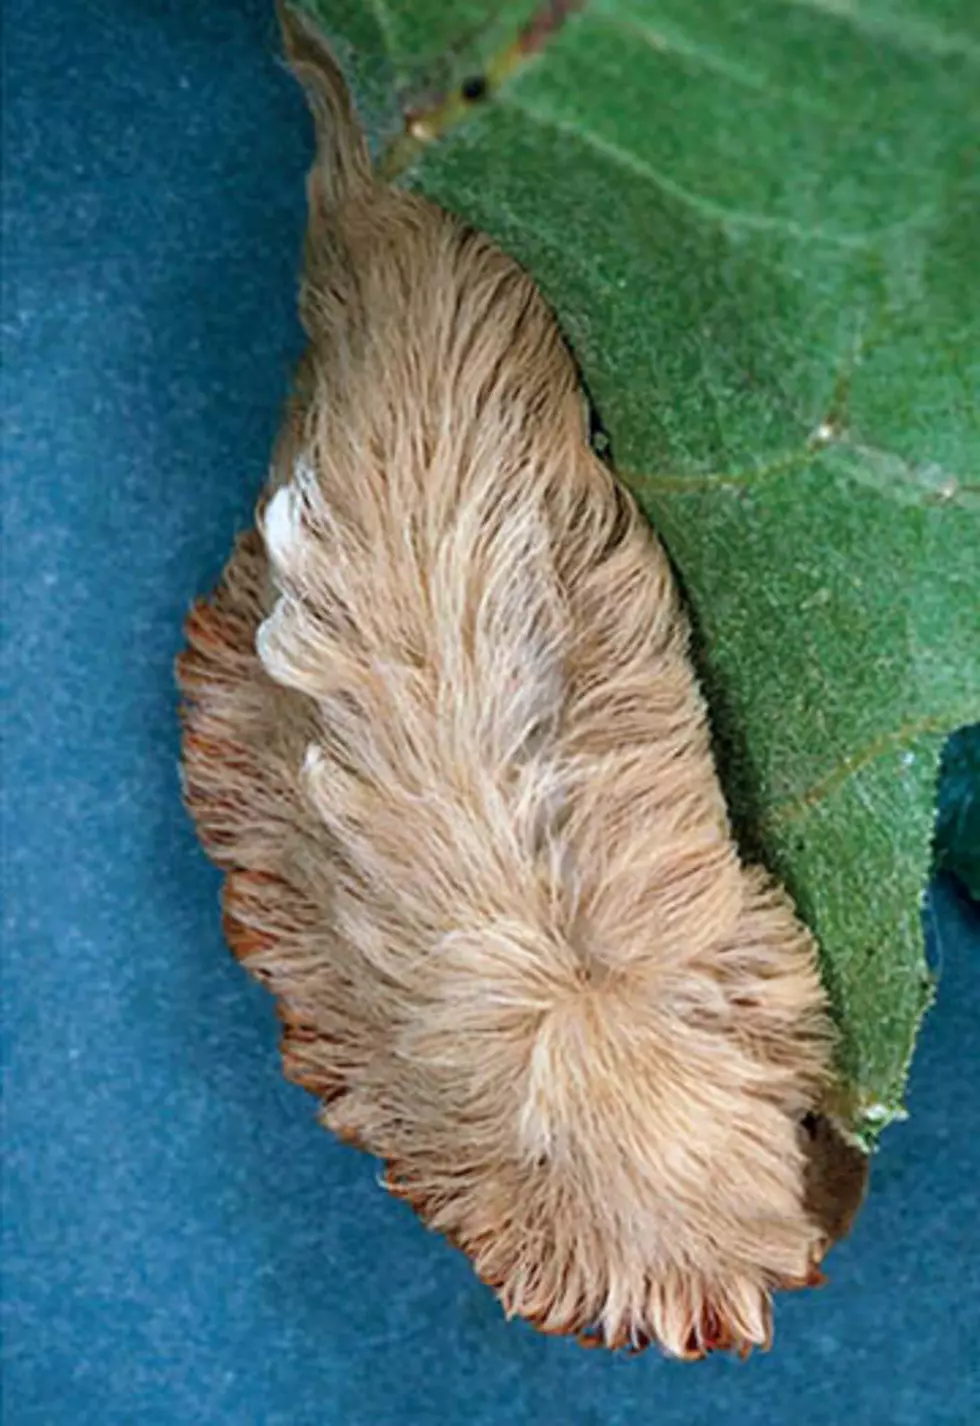 Louisiana Caterpillar &#8220;Puss Moth&#8221; is Nothing to Laugh At